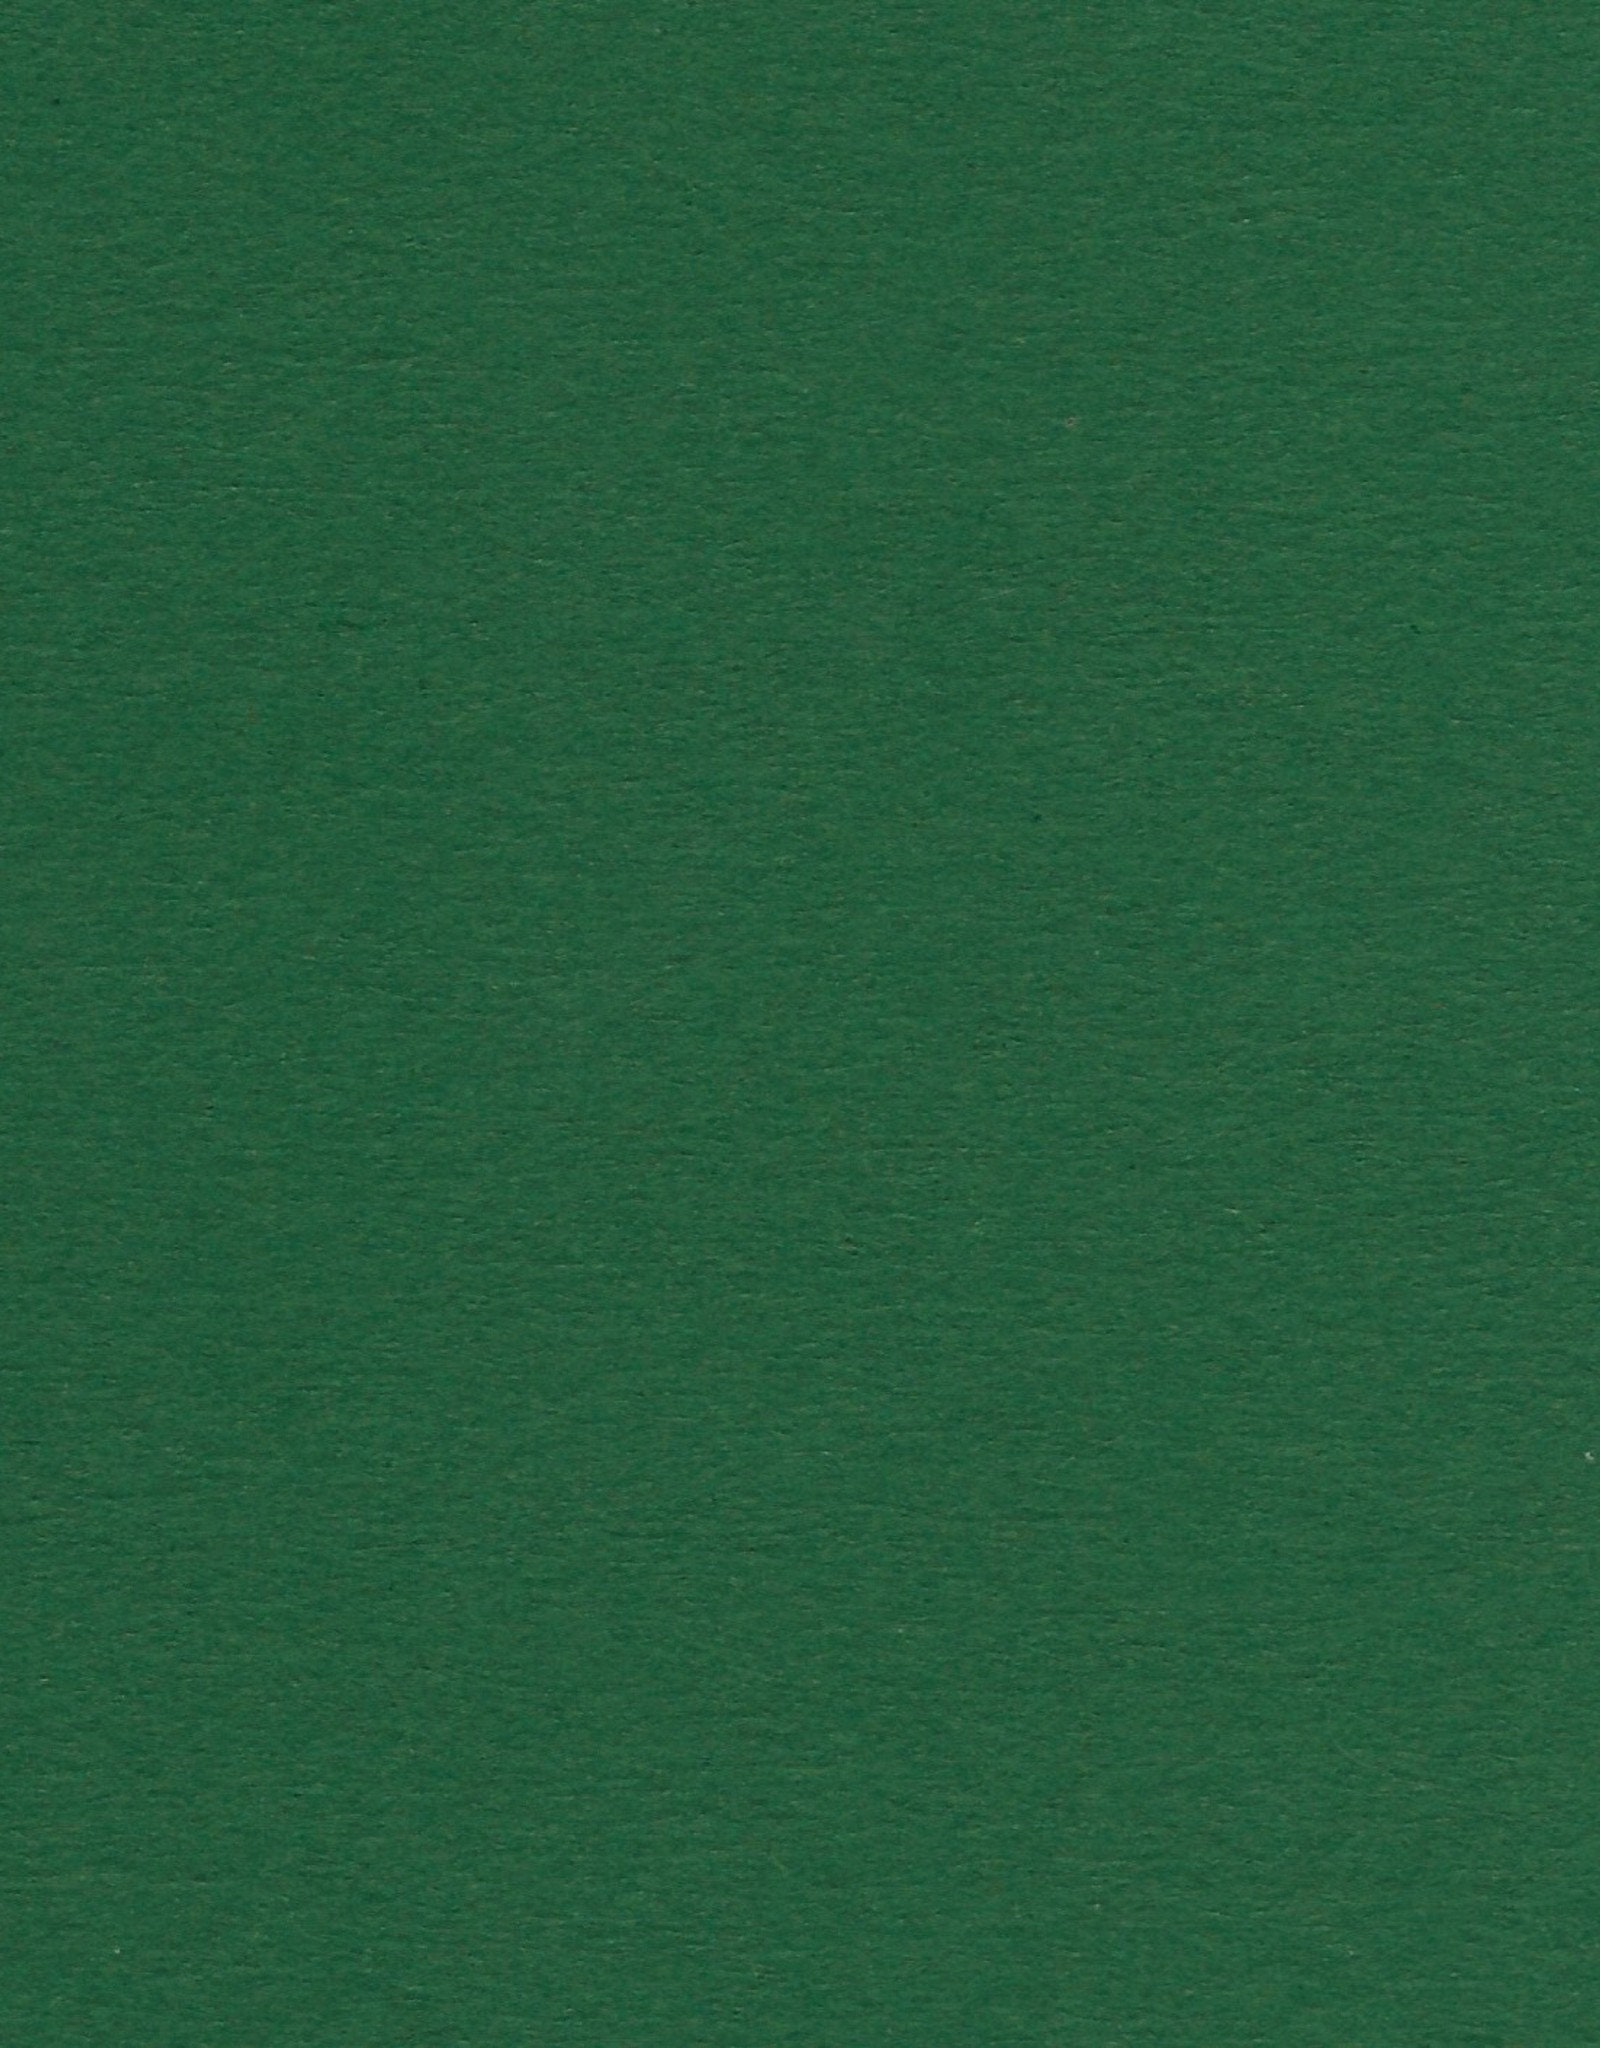 Bottle Green Cardstock - 825 Inch X 1175 Inch - 250 Gsm